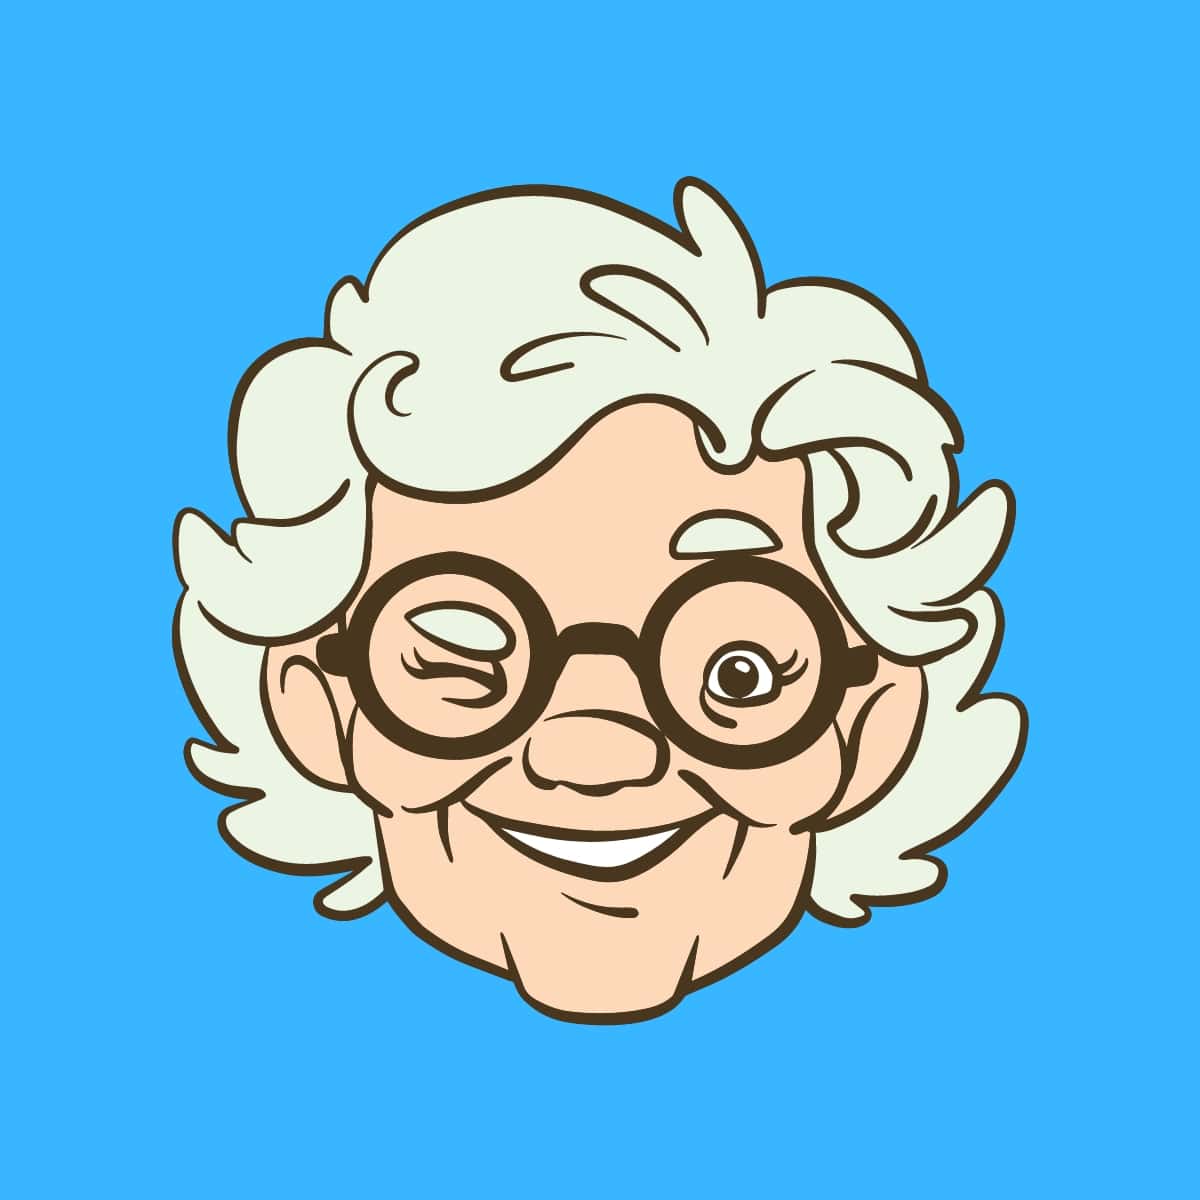 Cartoon graphic of a grandma's face winking and smiling on a blue background.